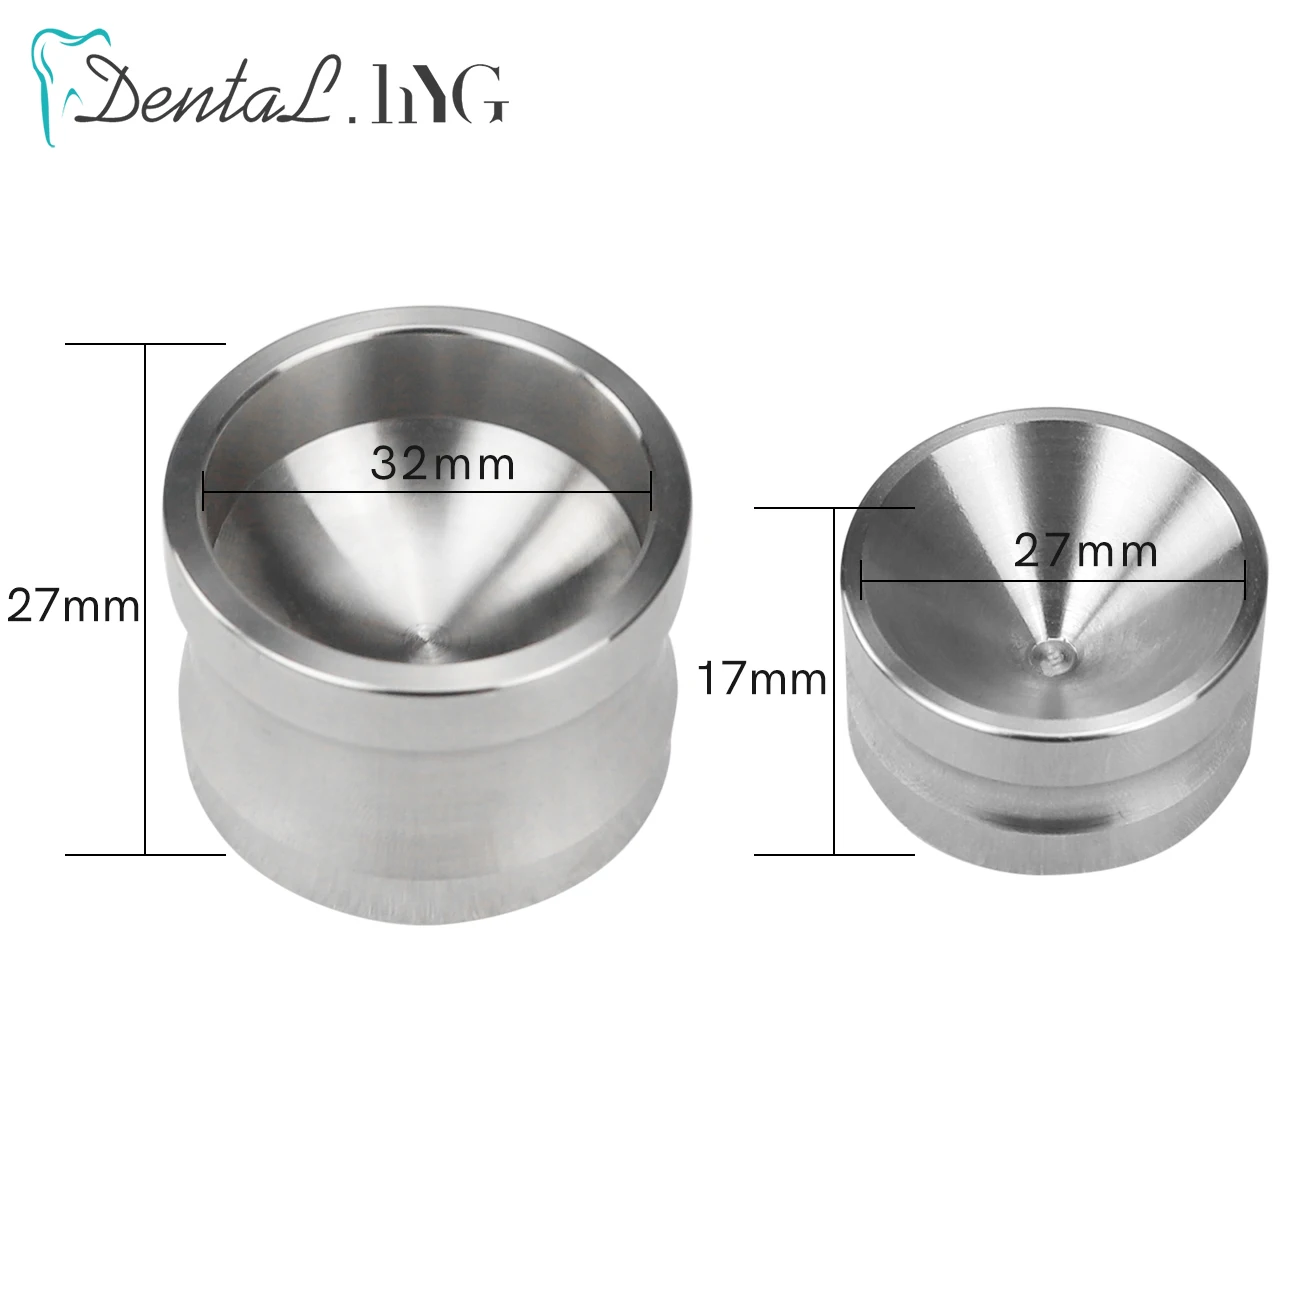 Dental Surgical Implant Bone Mixing Bowl Small (Stainless Steel) - 5CM